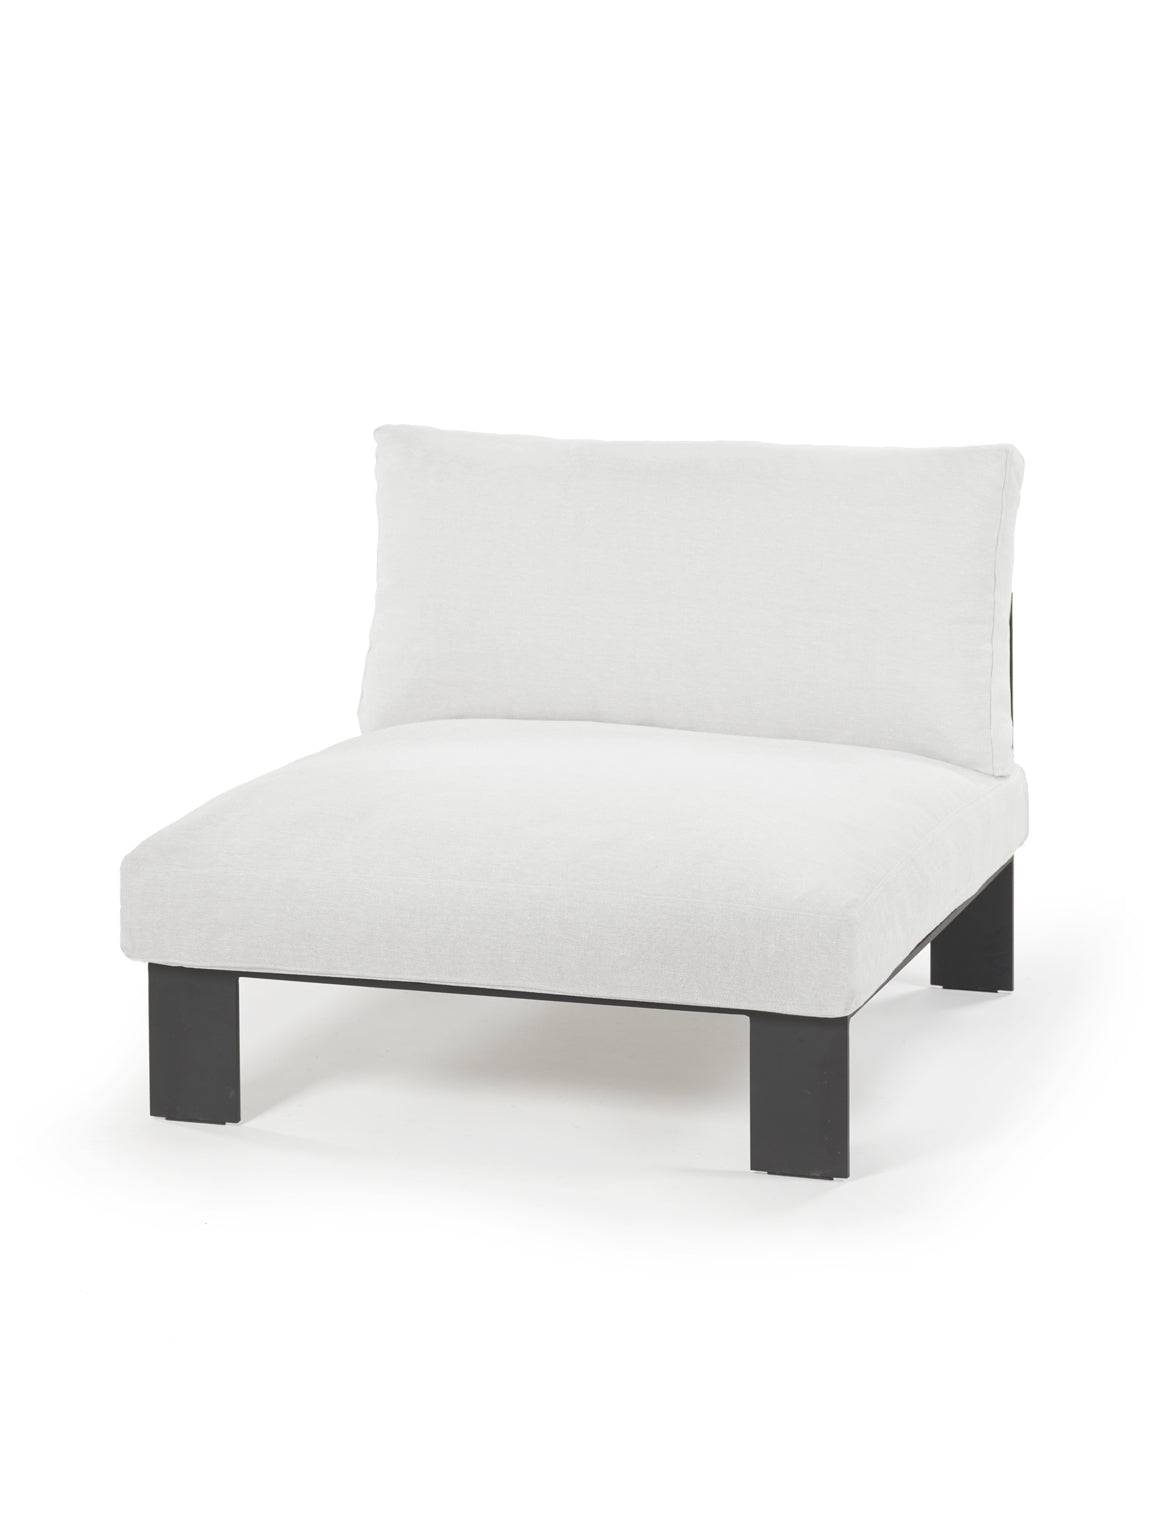 Mombaers Outdoor Lounge Chair - White - THAT COOL LIVING